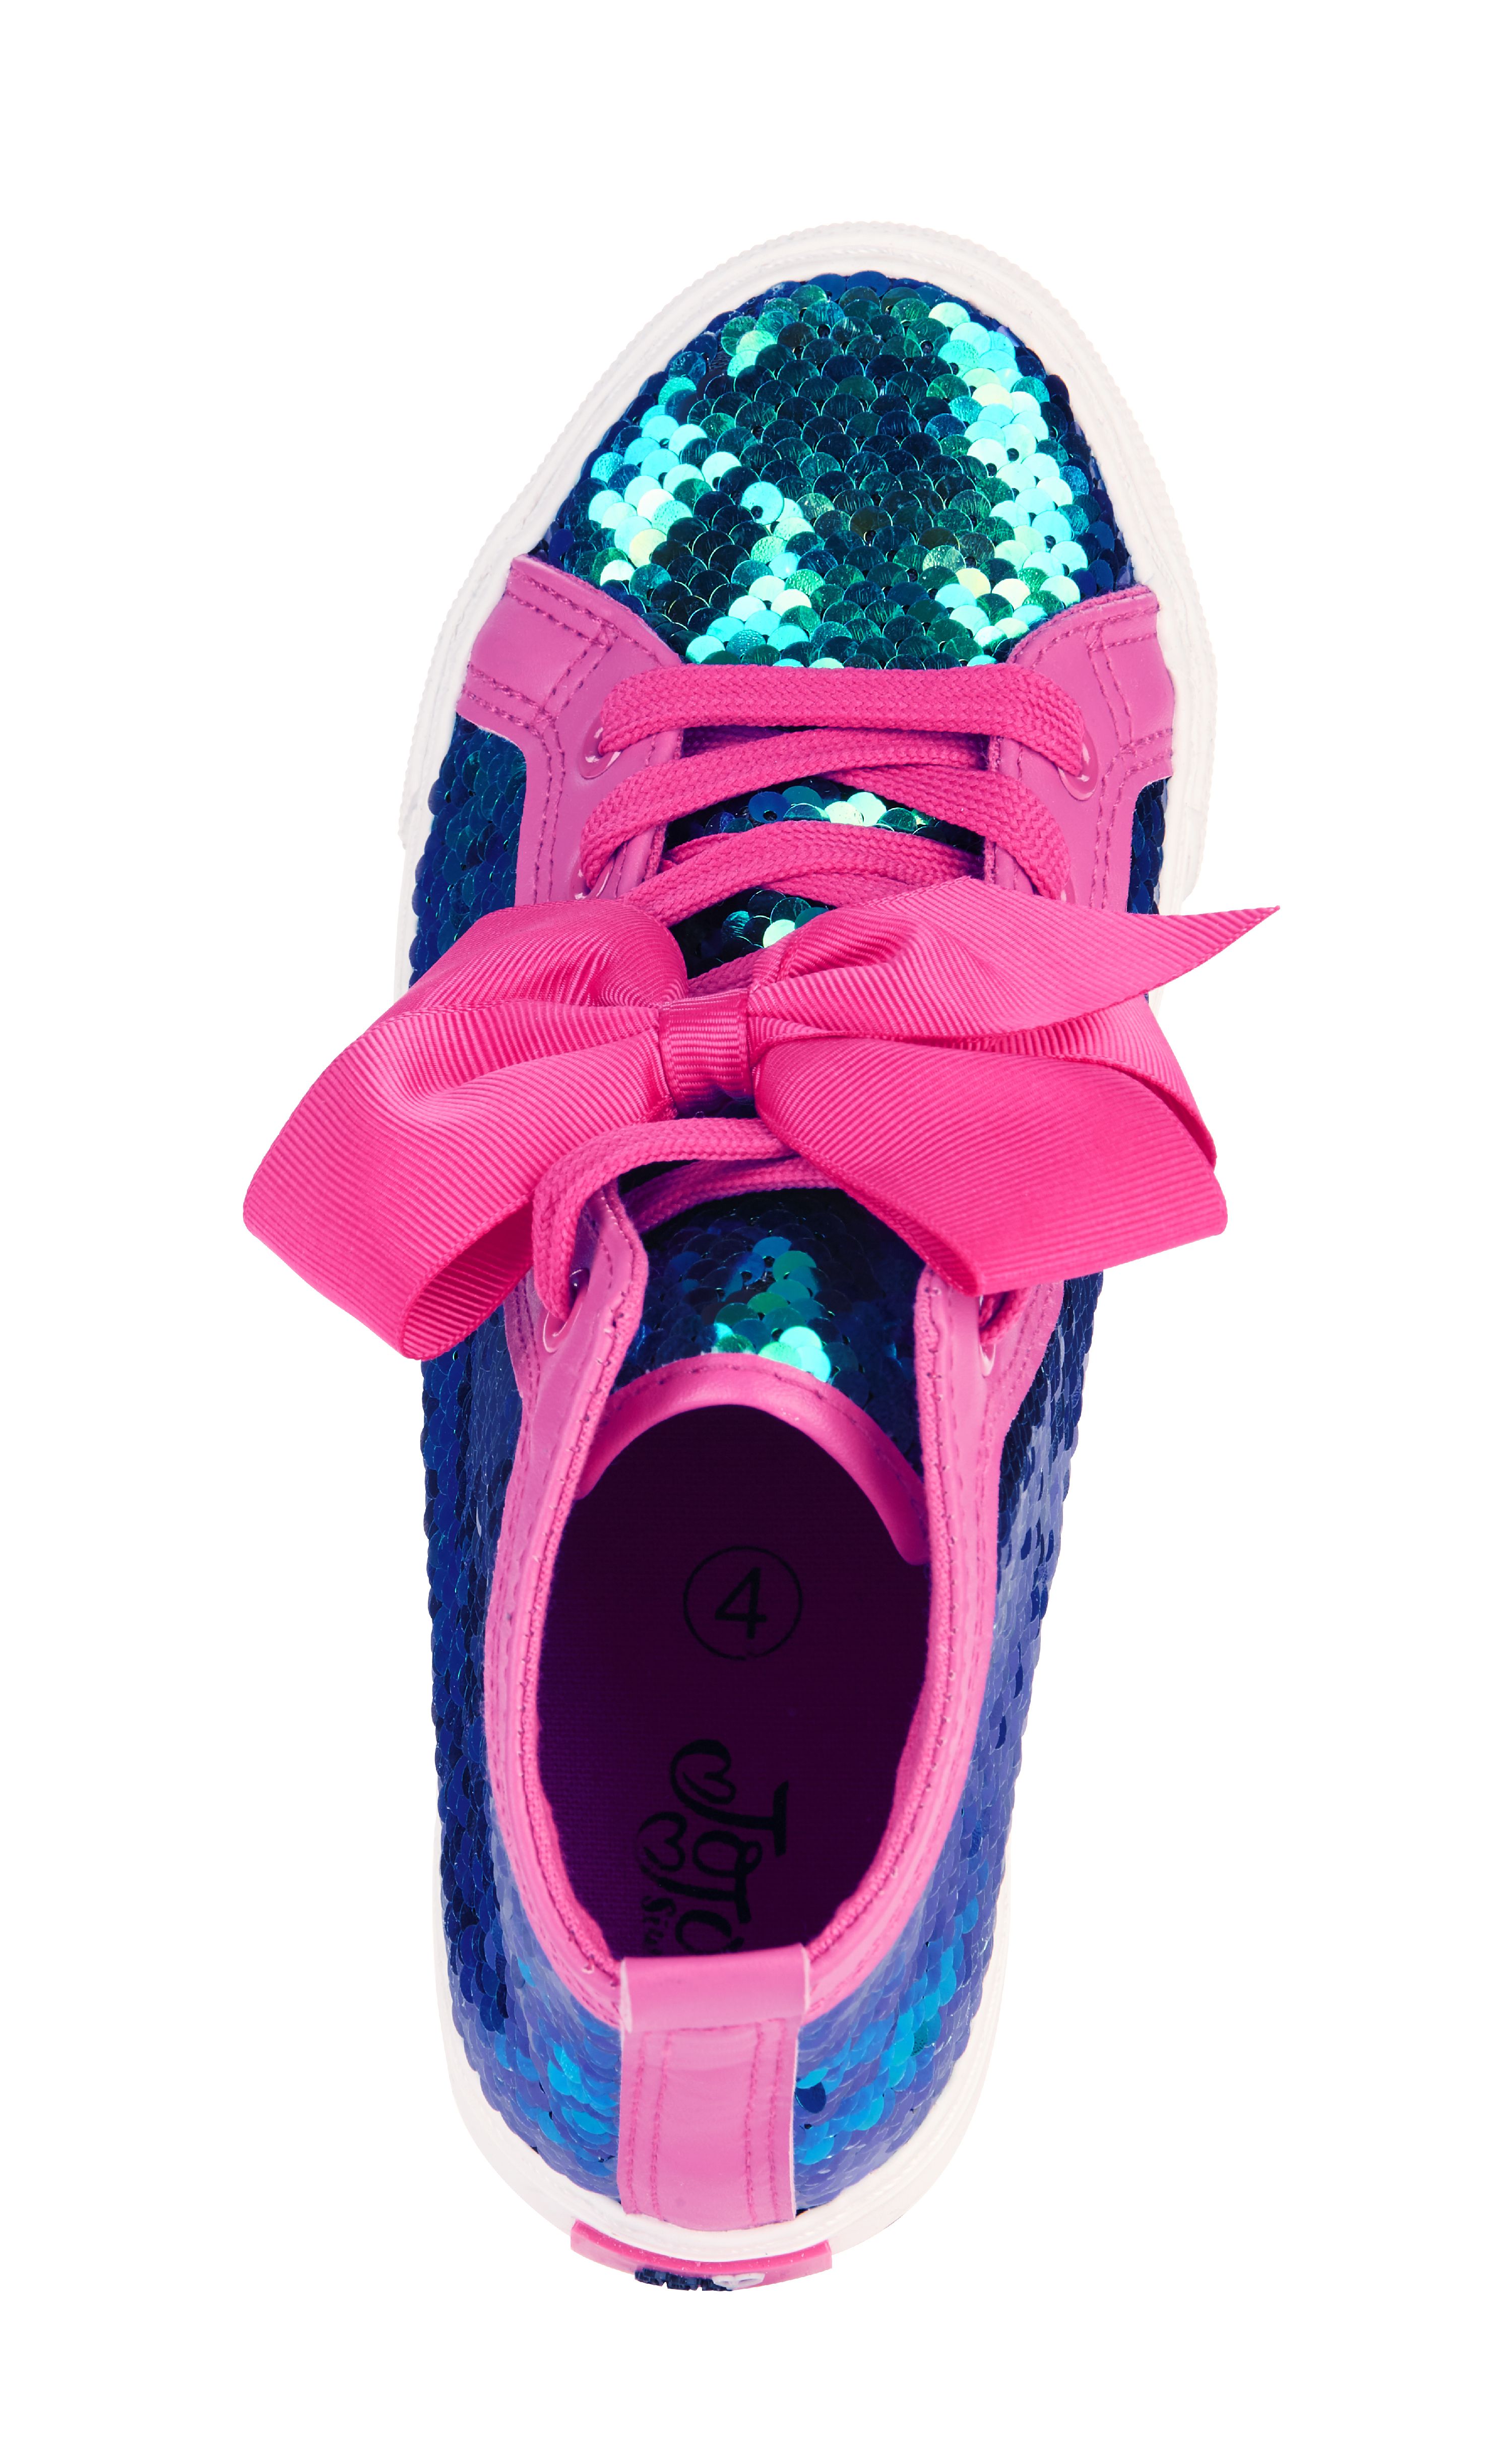 Jojo Siwa Girl's Sequin High Top Sneaker With Bow - image 5 of 8